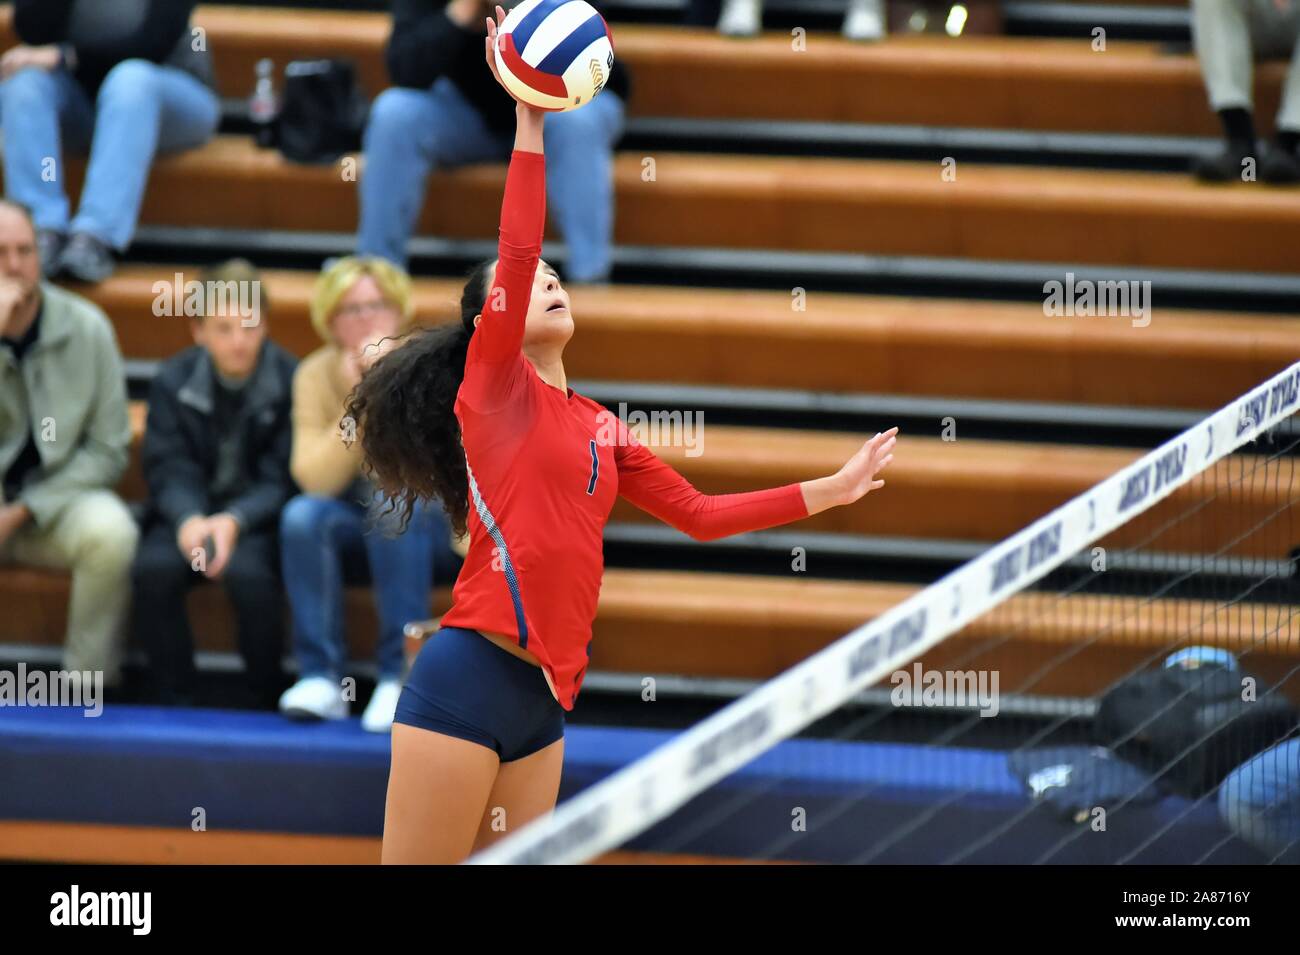 Player attempting to deliver a kill shot to end a prolonged volley. USA. Stock Photo